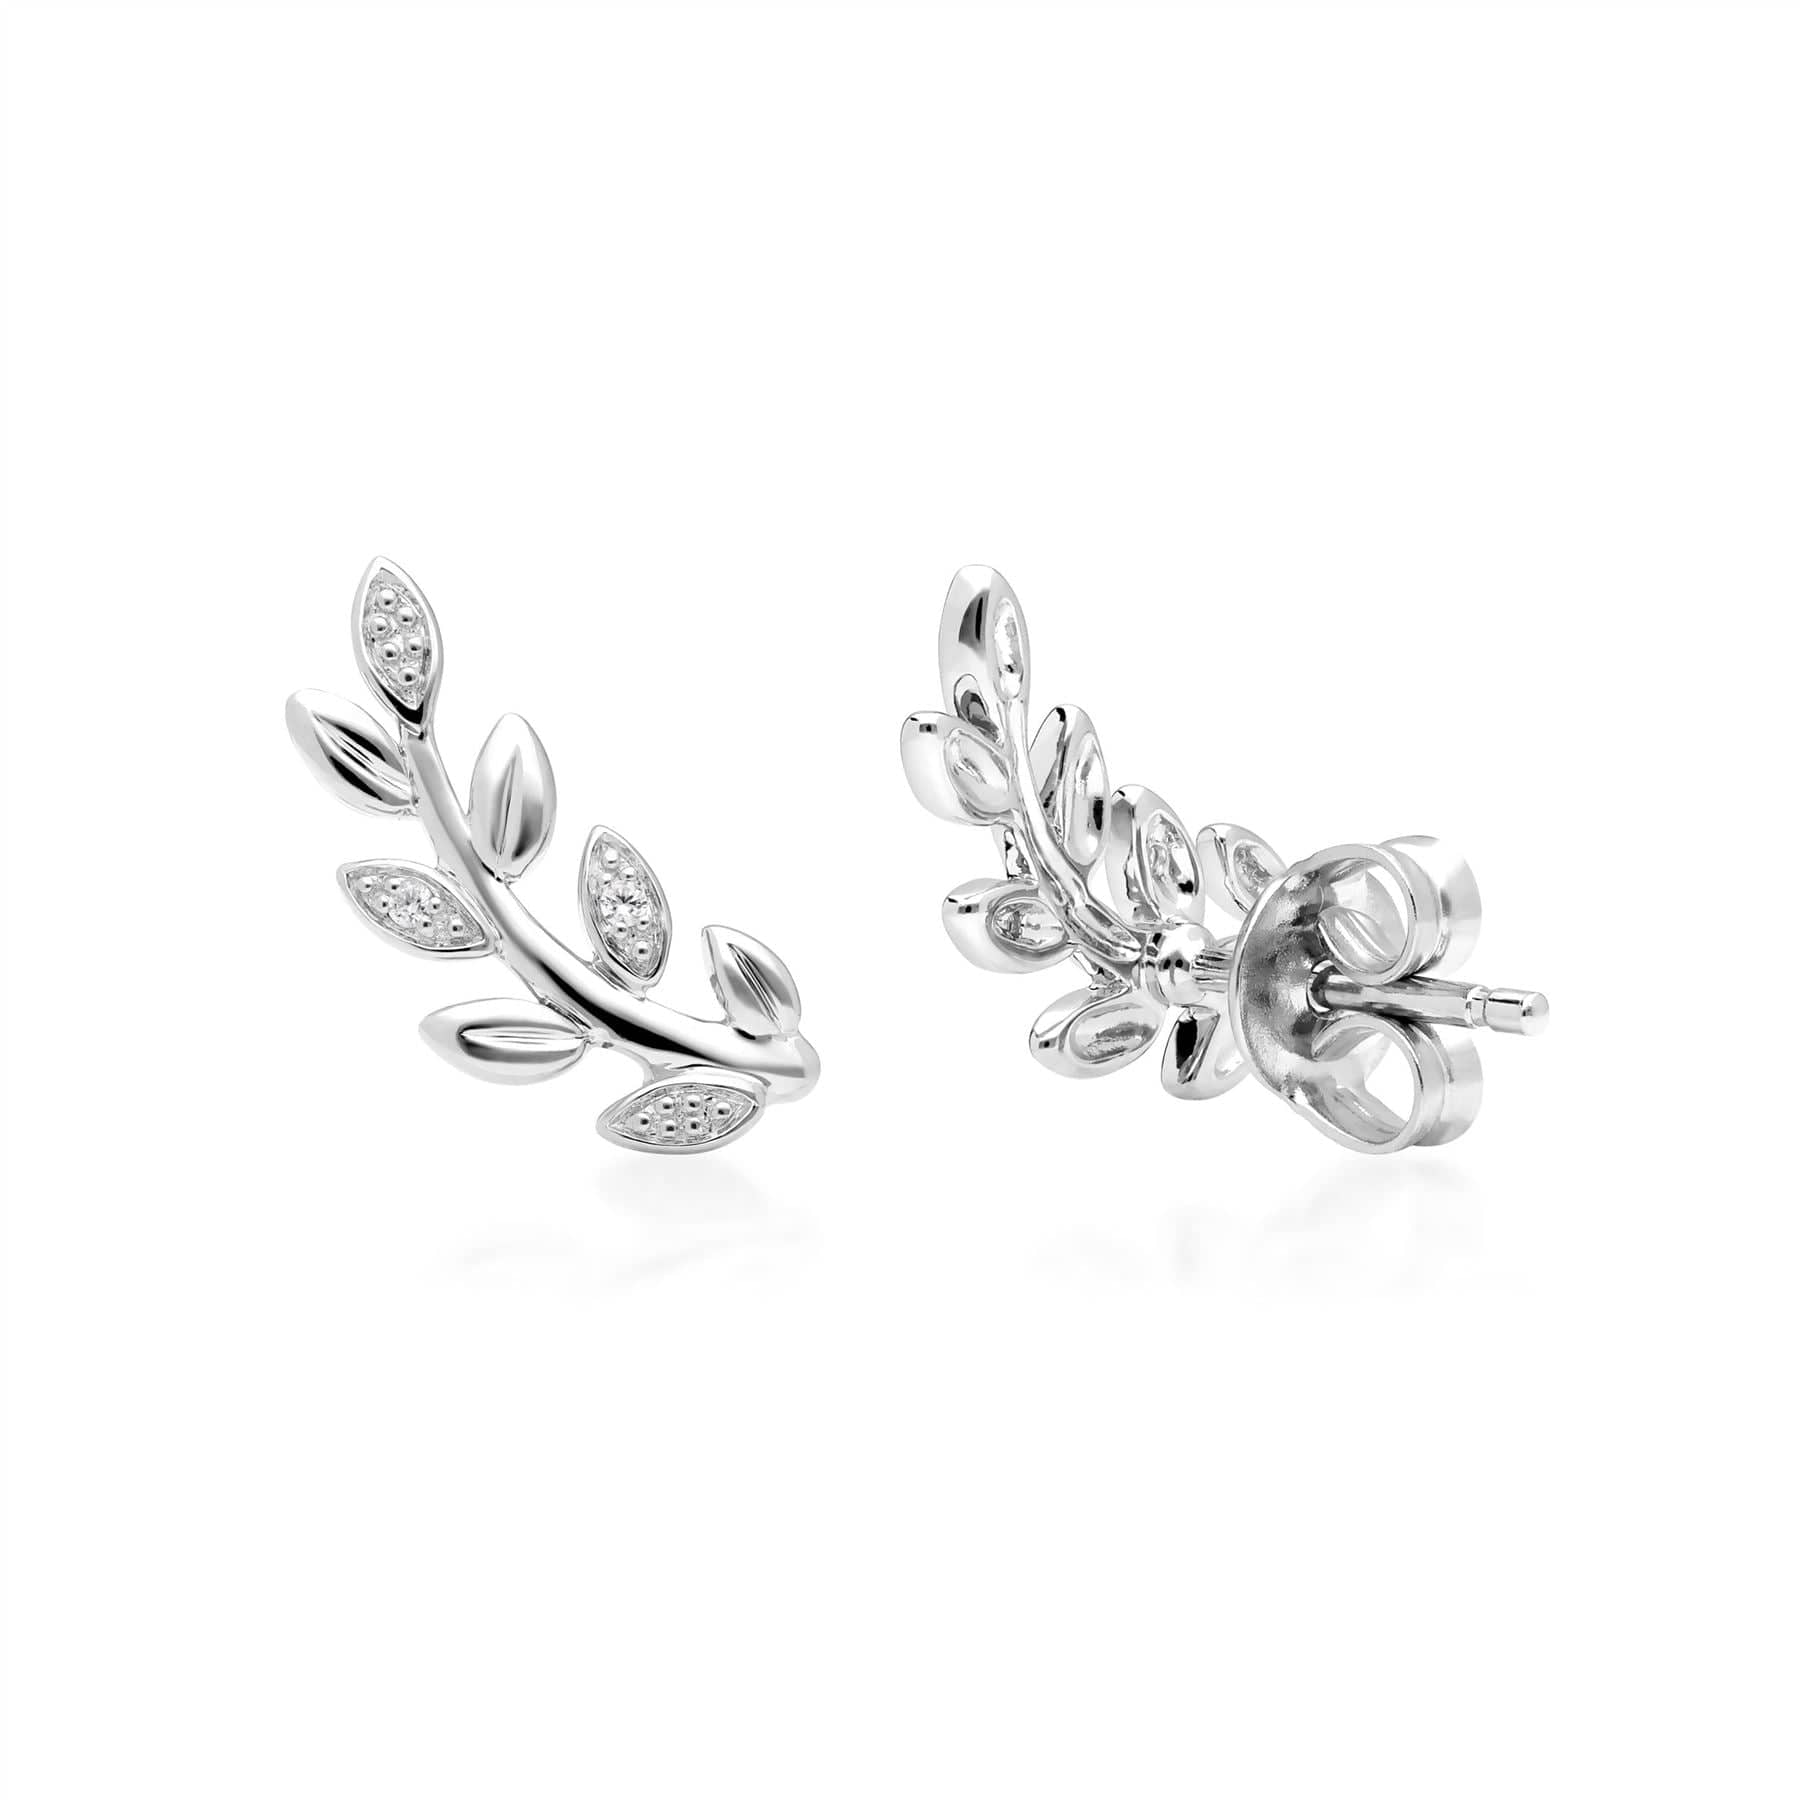 162E0273019 O Leaf Diamond Pave Stud Earrings in 9ct White Gold 3